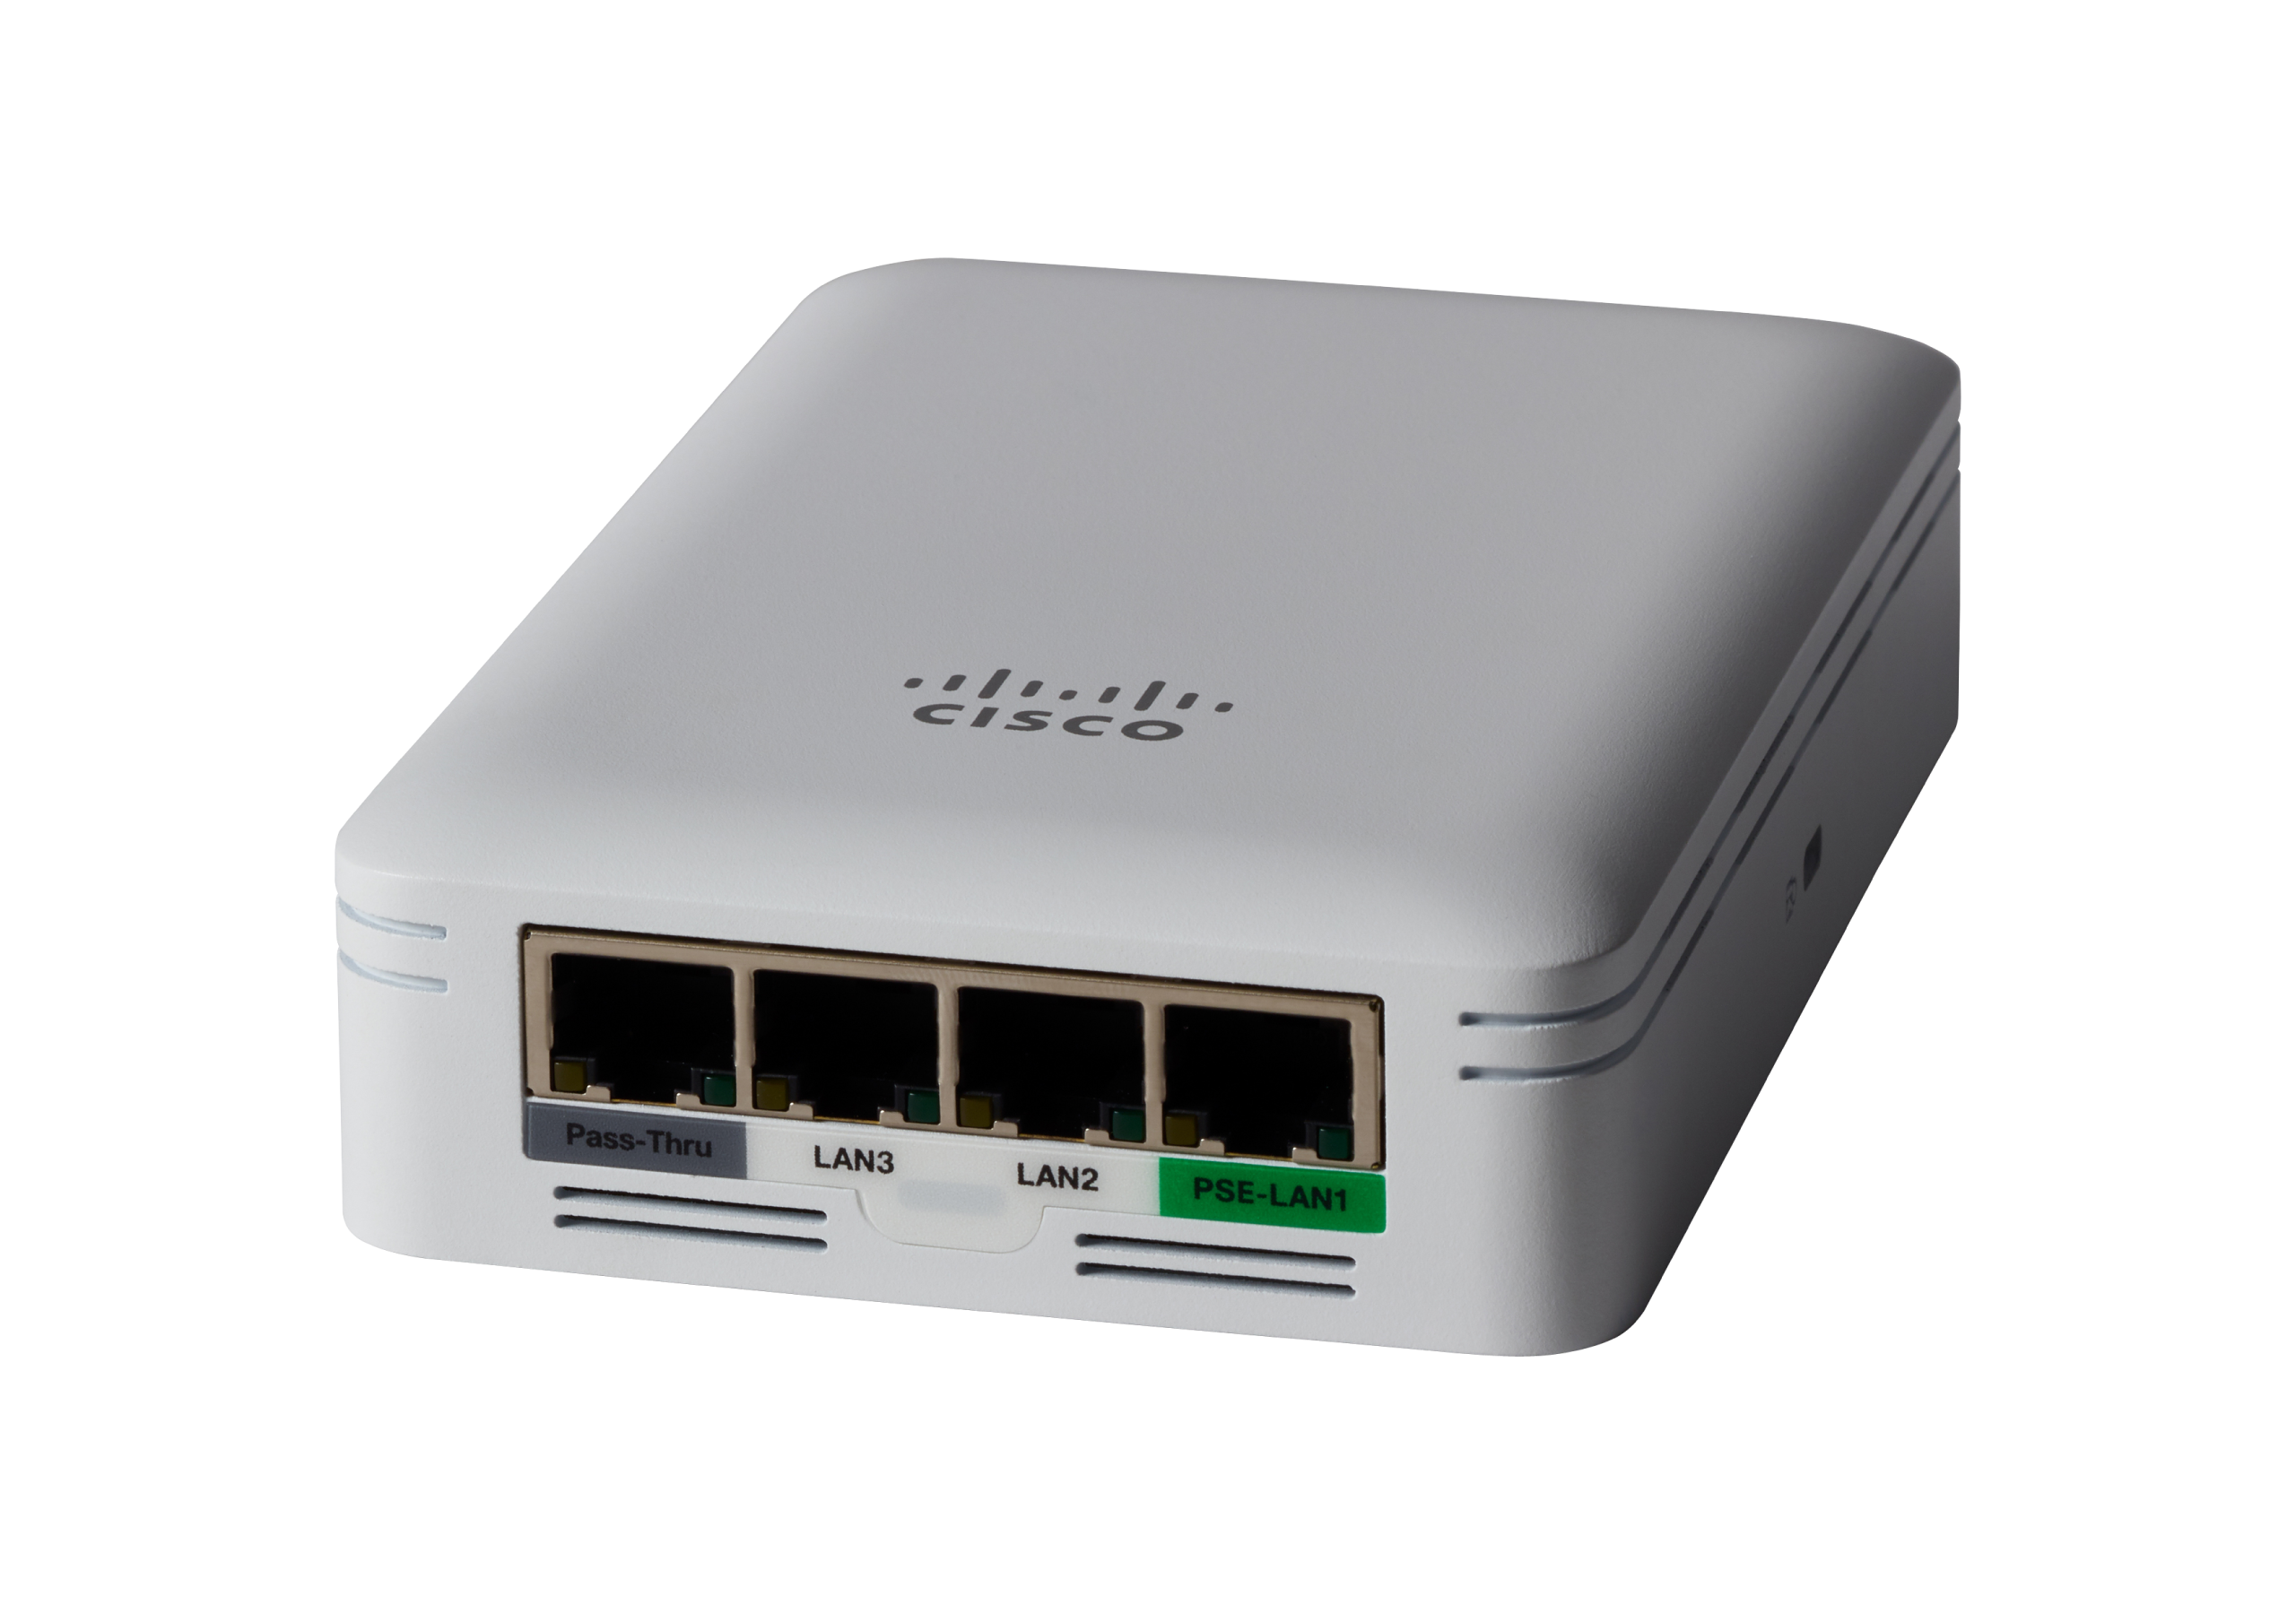 Picture of Cisco 145AC IEEE 802.11ac 1 Gbit/s Wireless Access Point - 2.40 GHz, 5 GHz - MIMO Technology - 5 x Network (RJ-45) - Gigabit Ethernet - PoE Ports - Wall Mountable